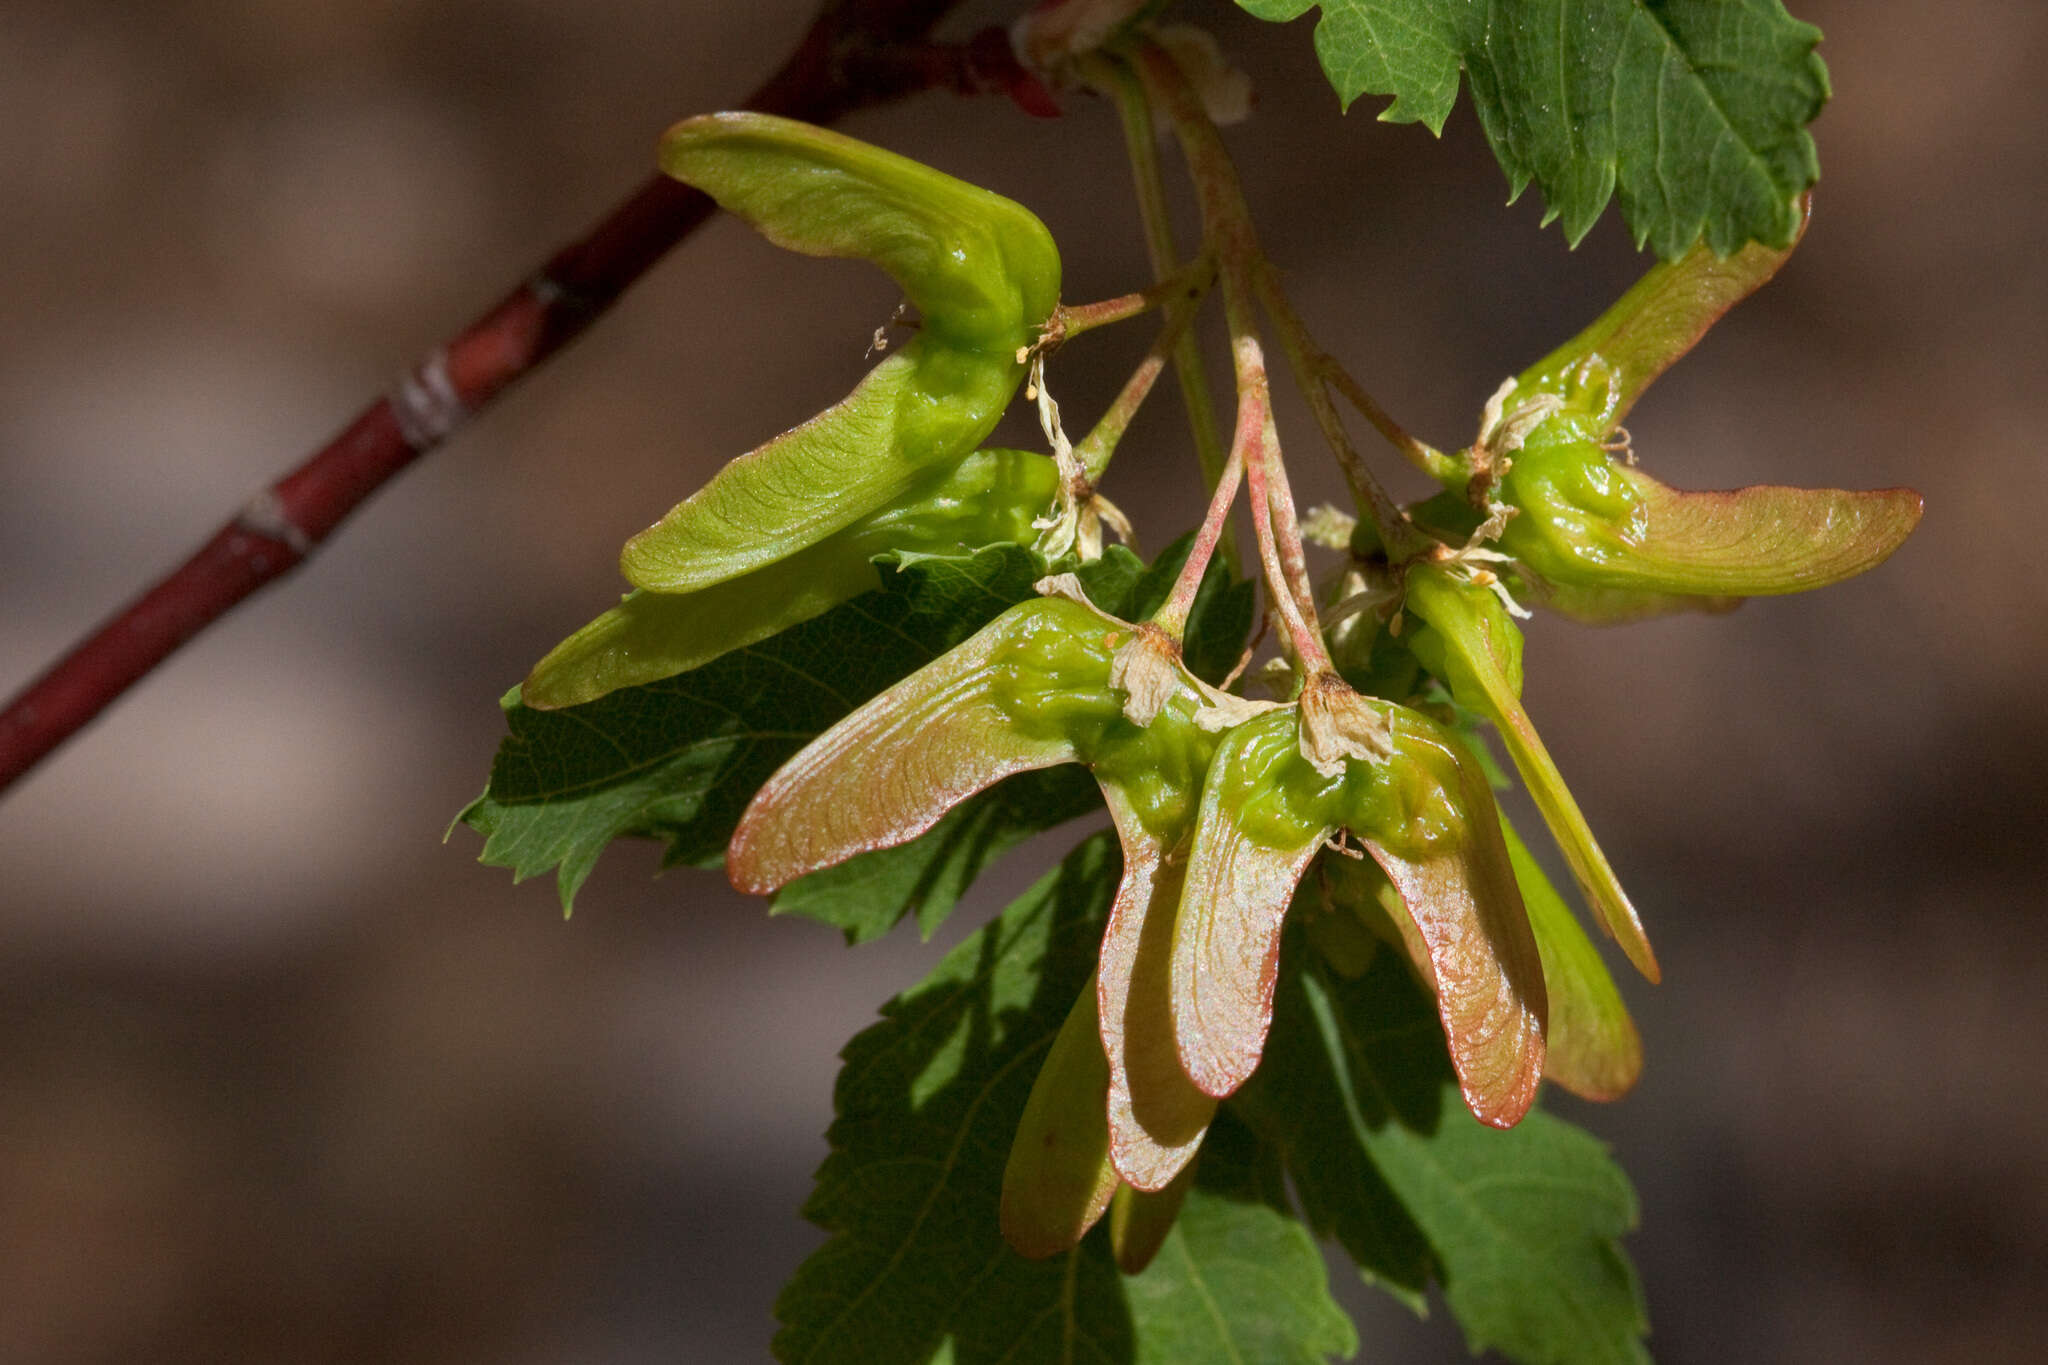 Image of New Mexico maple